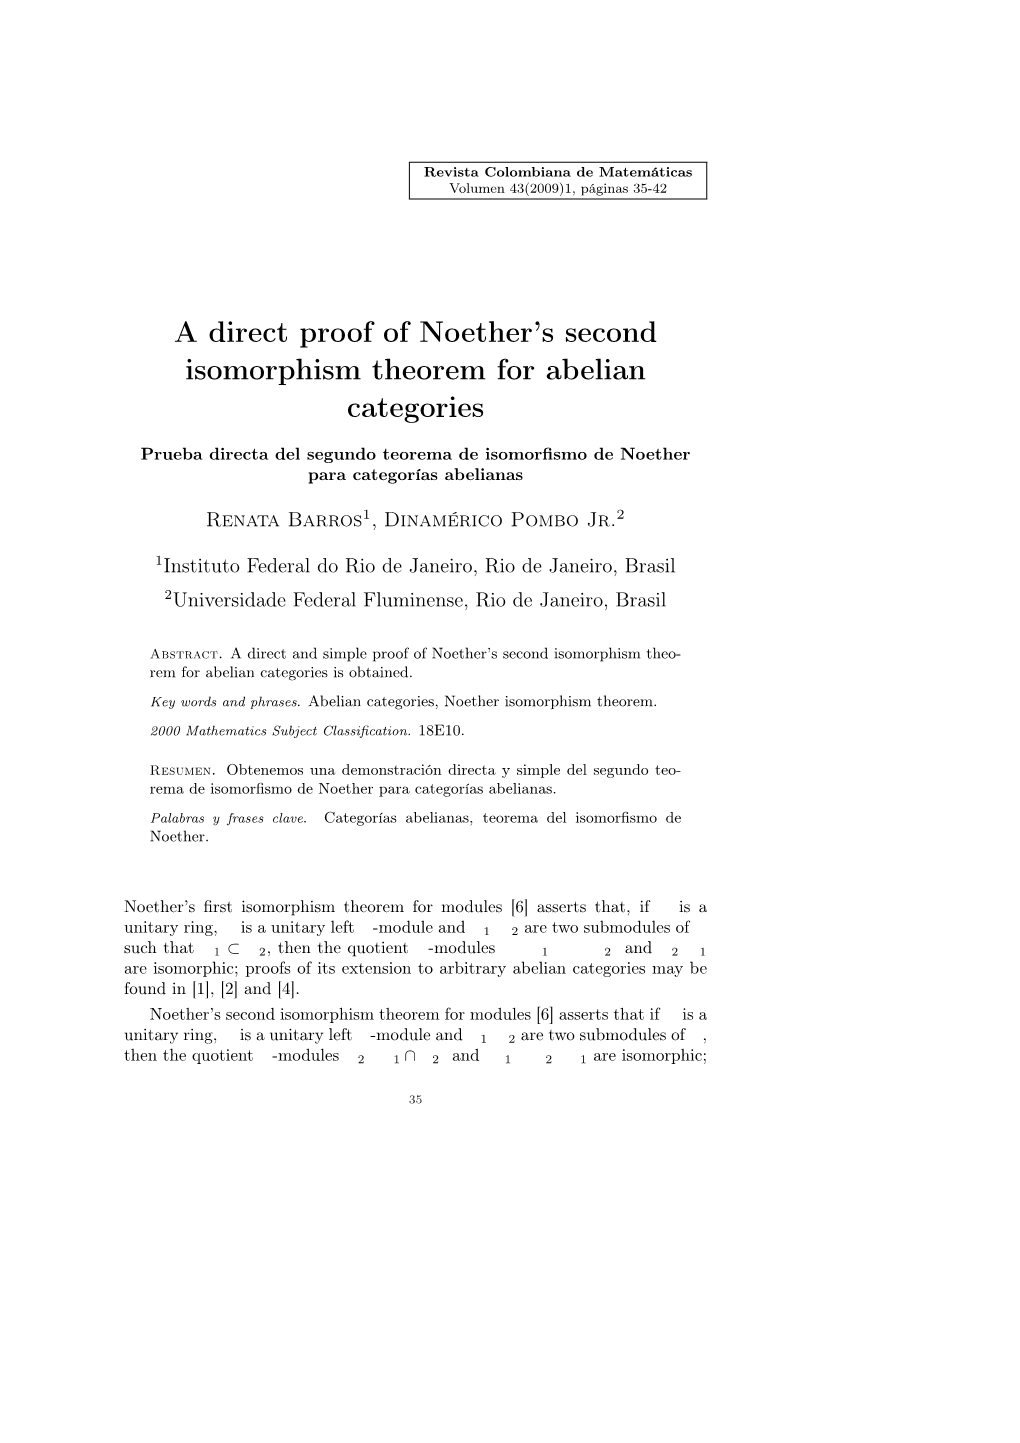 A Direct Proof of Noether's Second Isomorphism Theorem for Abelian